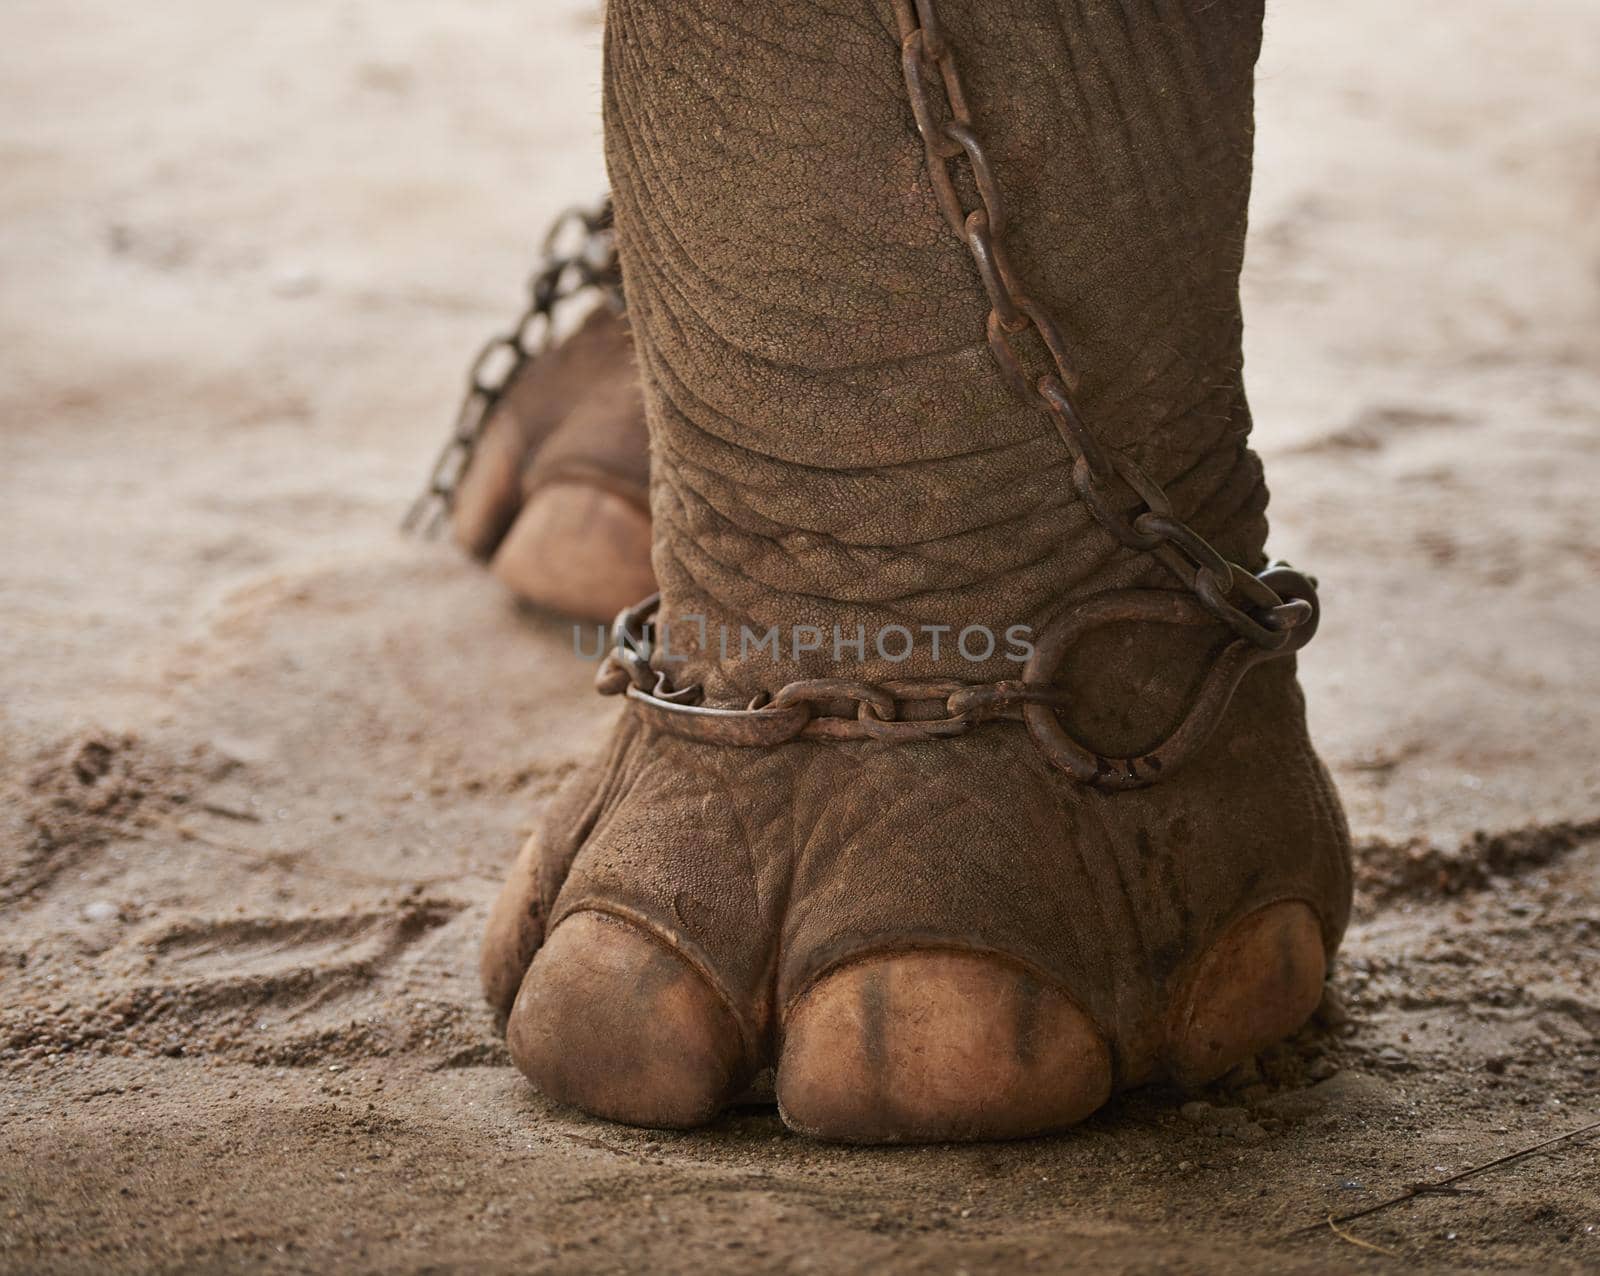 Closeup of a chain around the foot of an elephant in captivity.